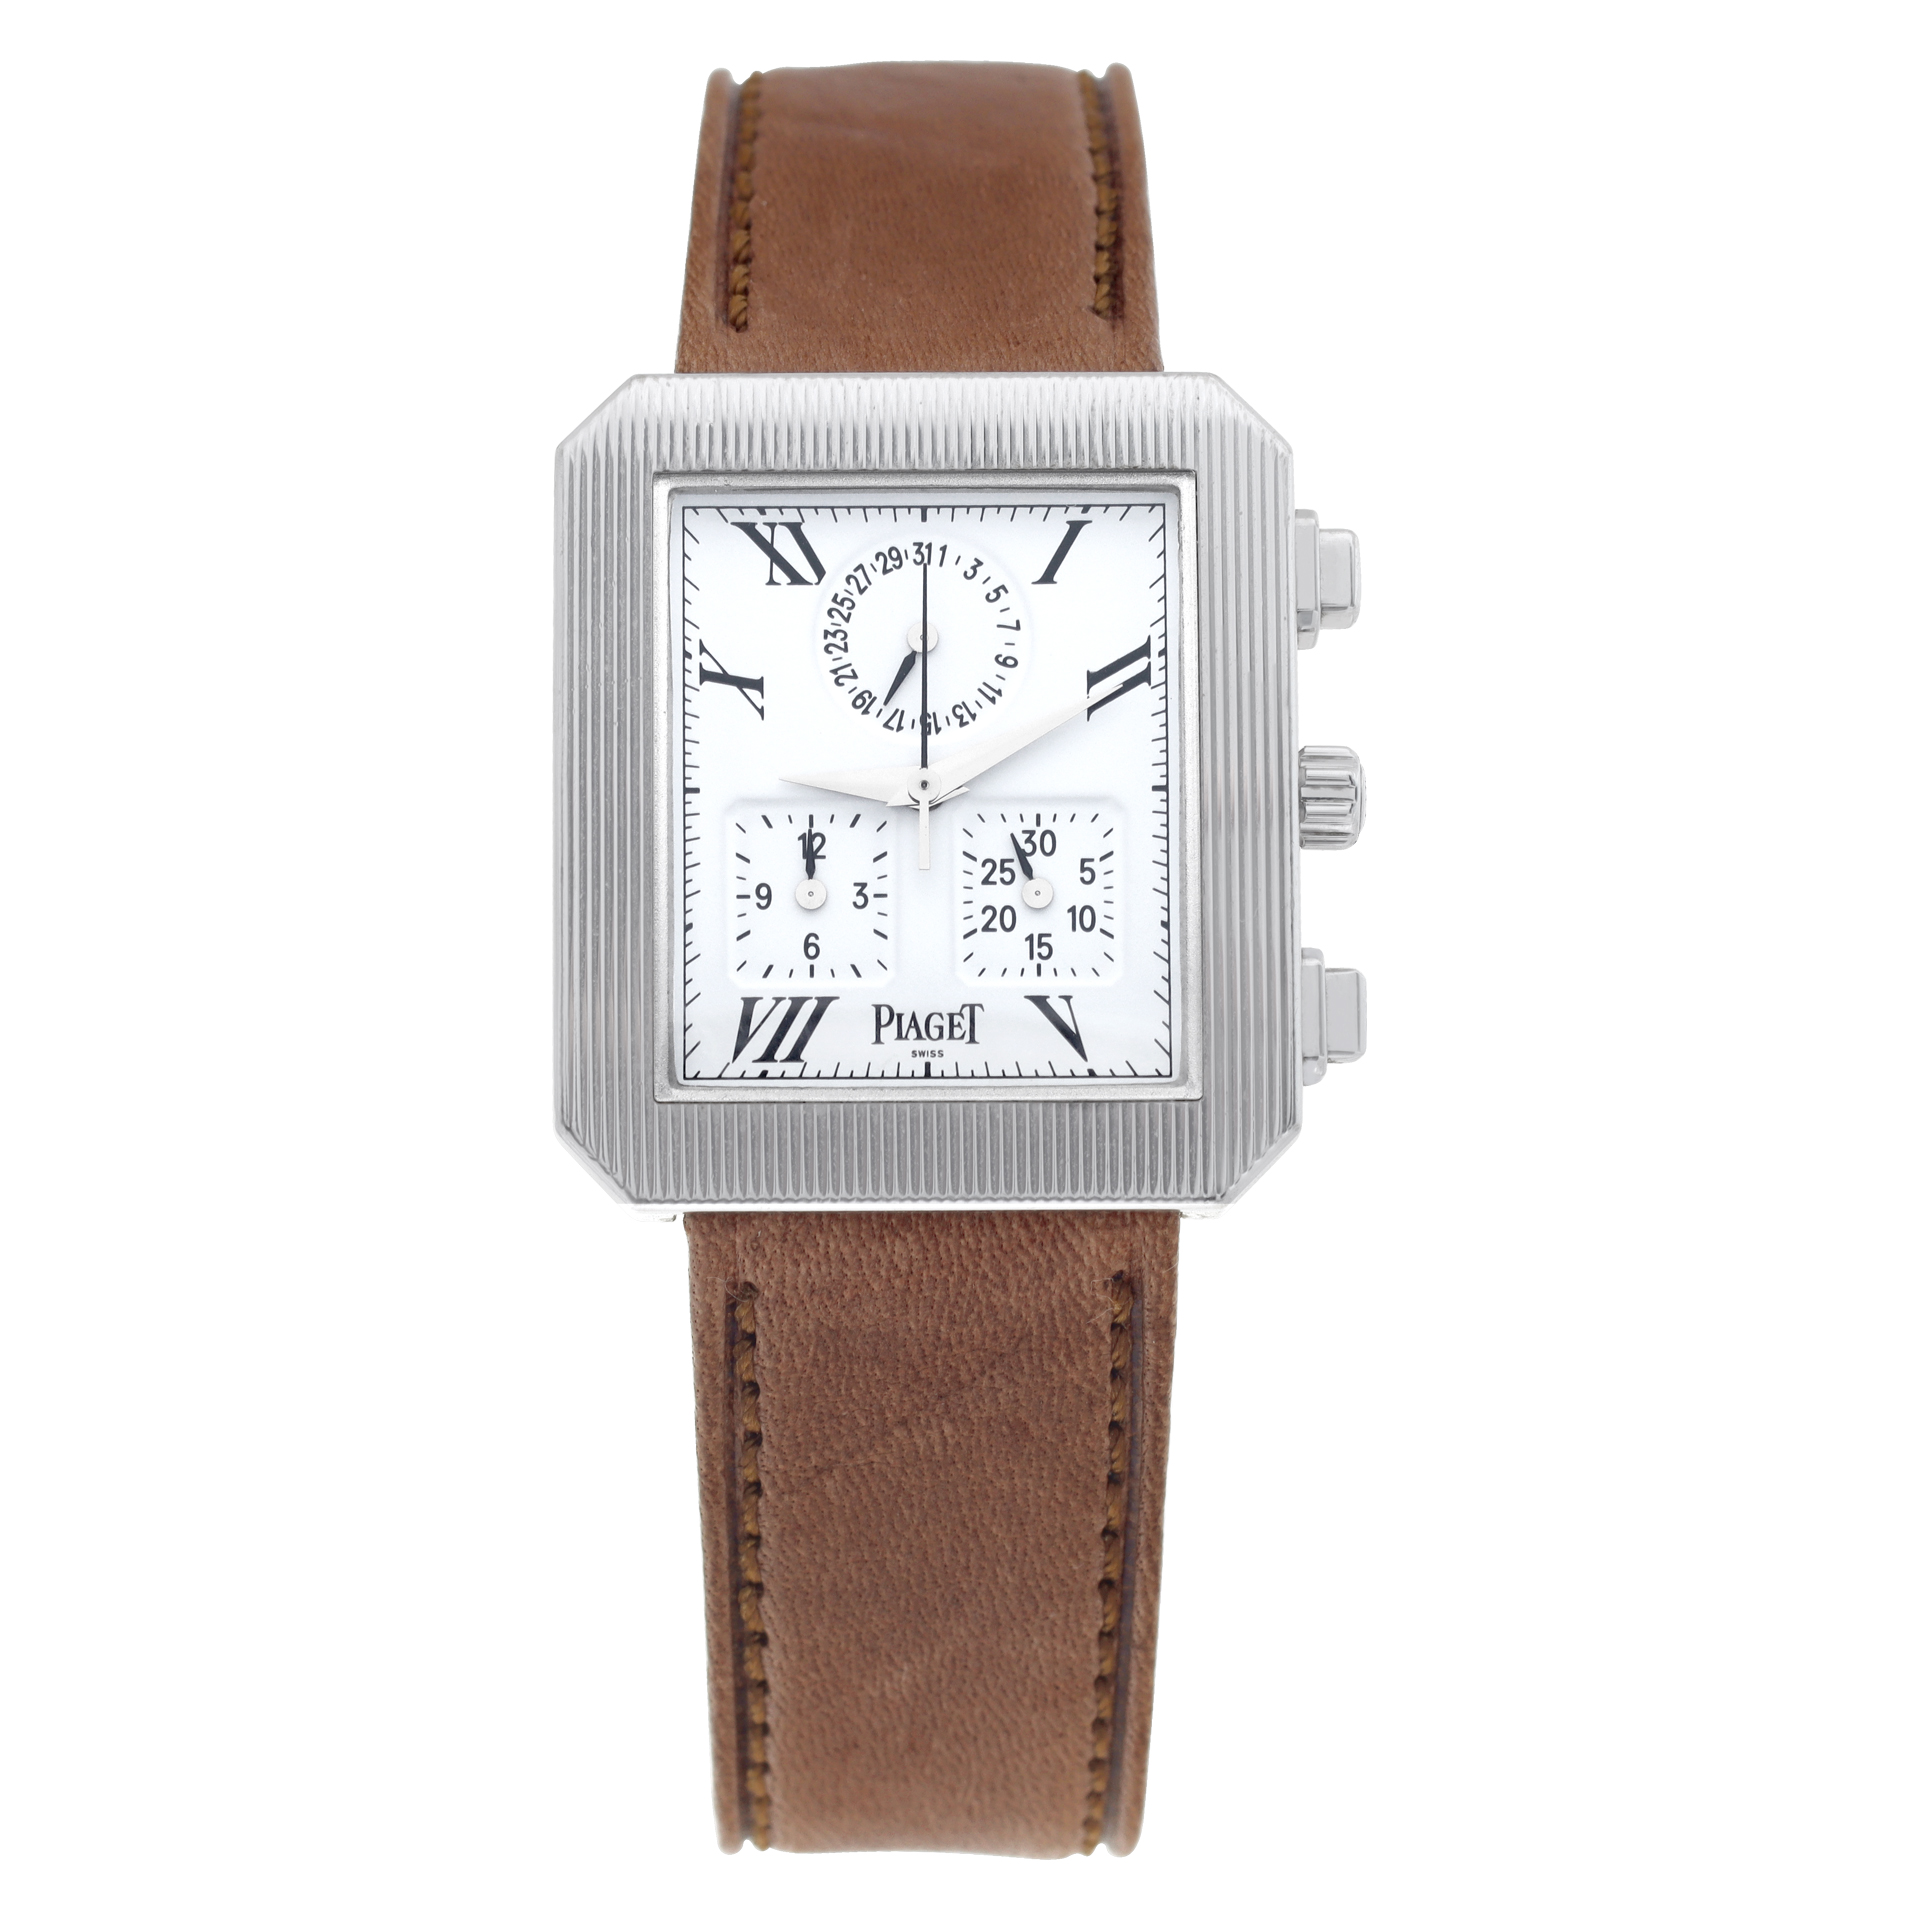 Piaget Protocol 28mm 14254 (Watches)